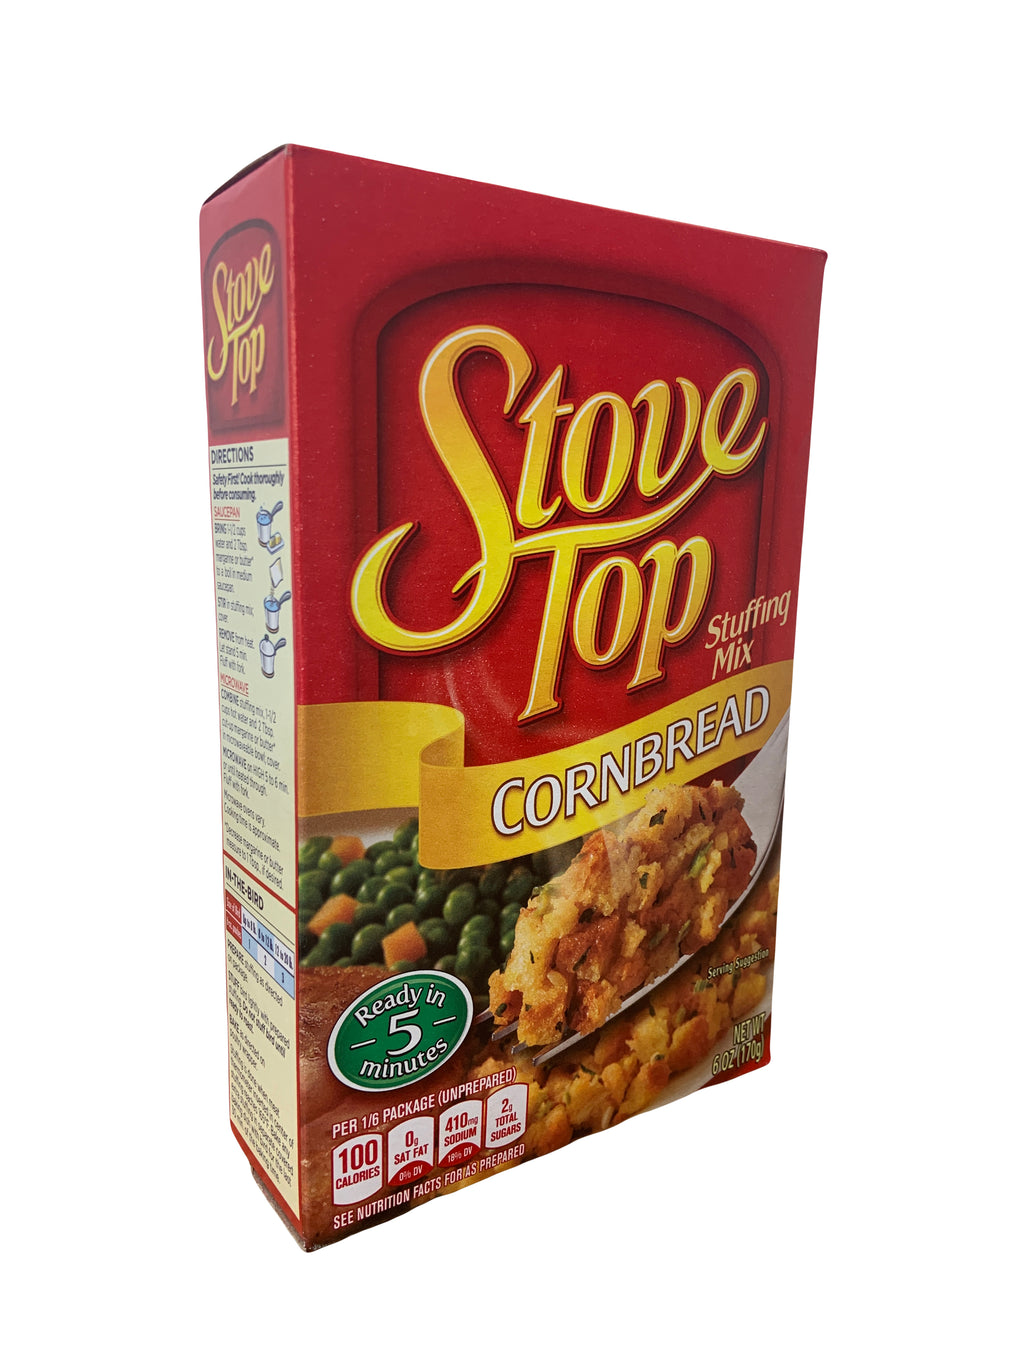 Stove Top Stuffing Mix Cornbread 6 Oz (Pack of 4)